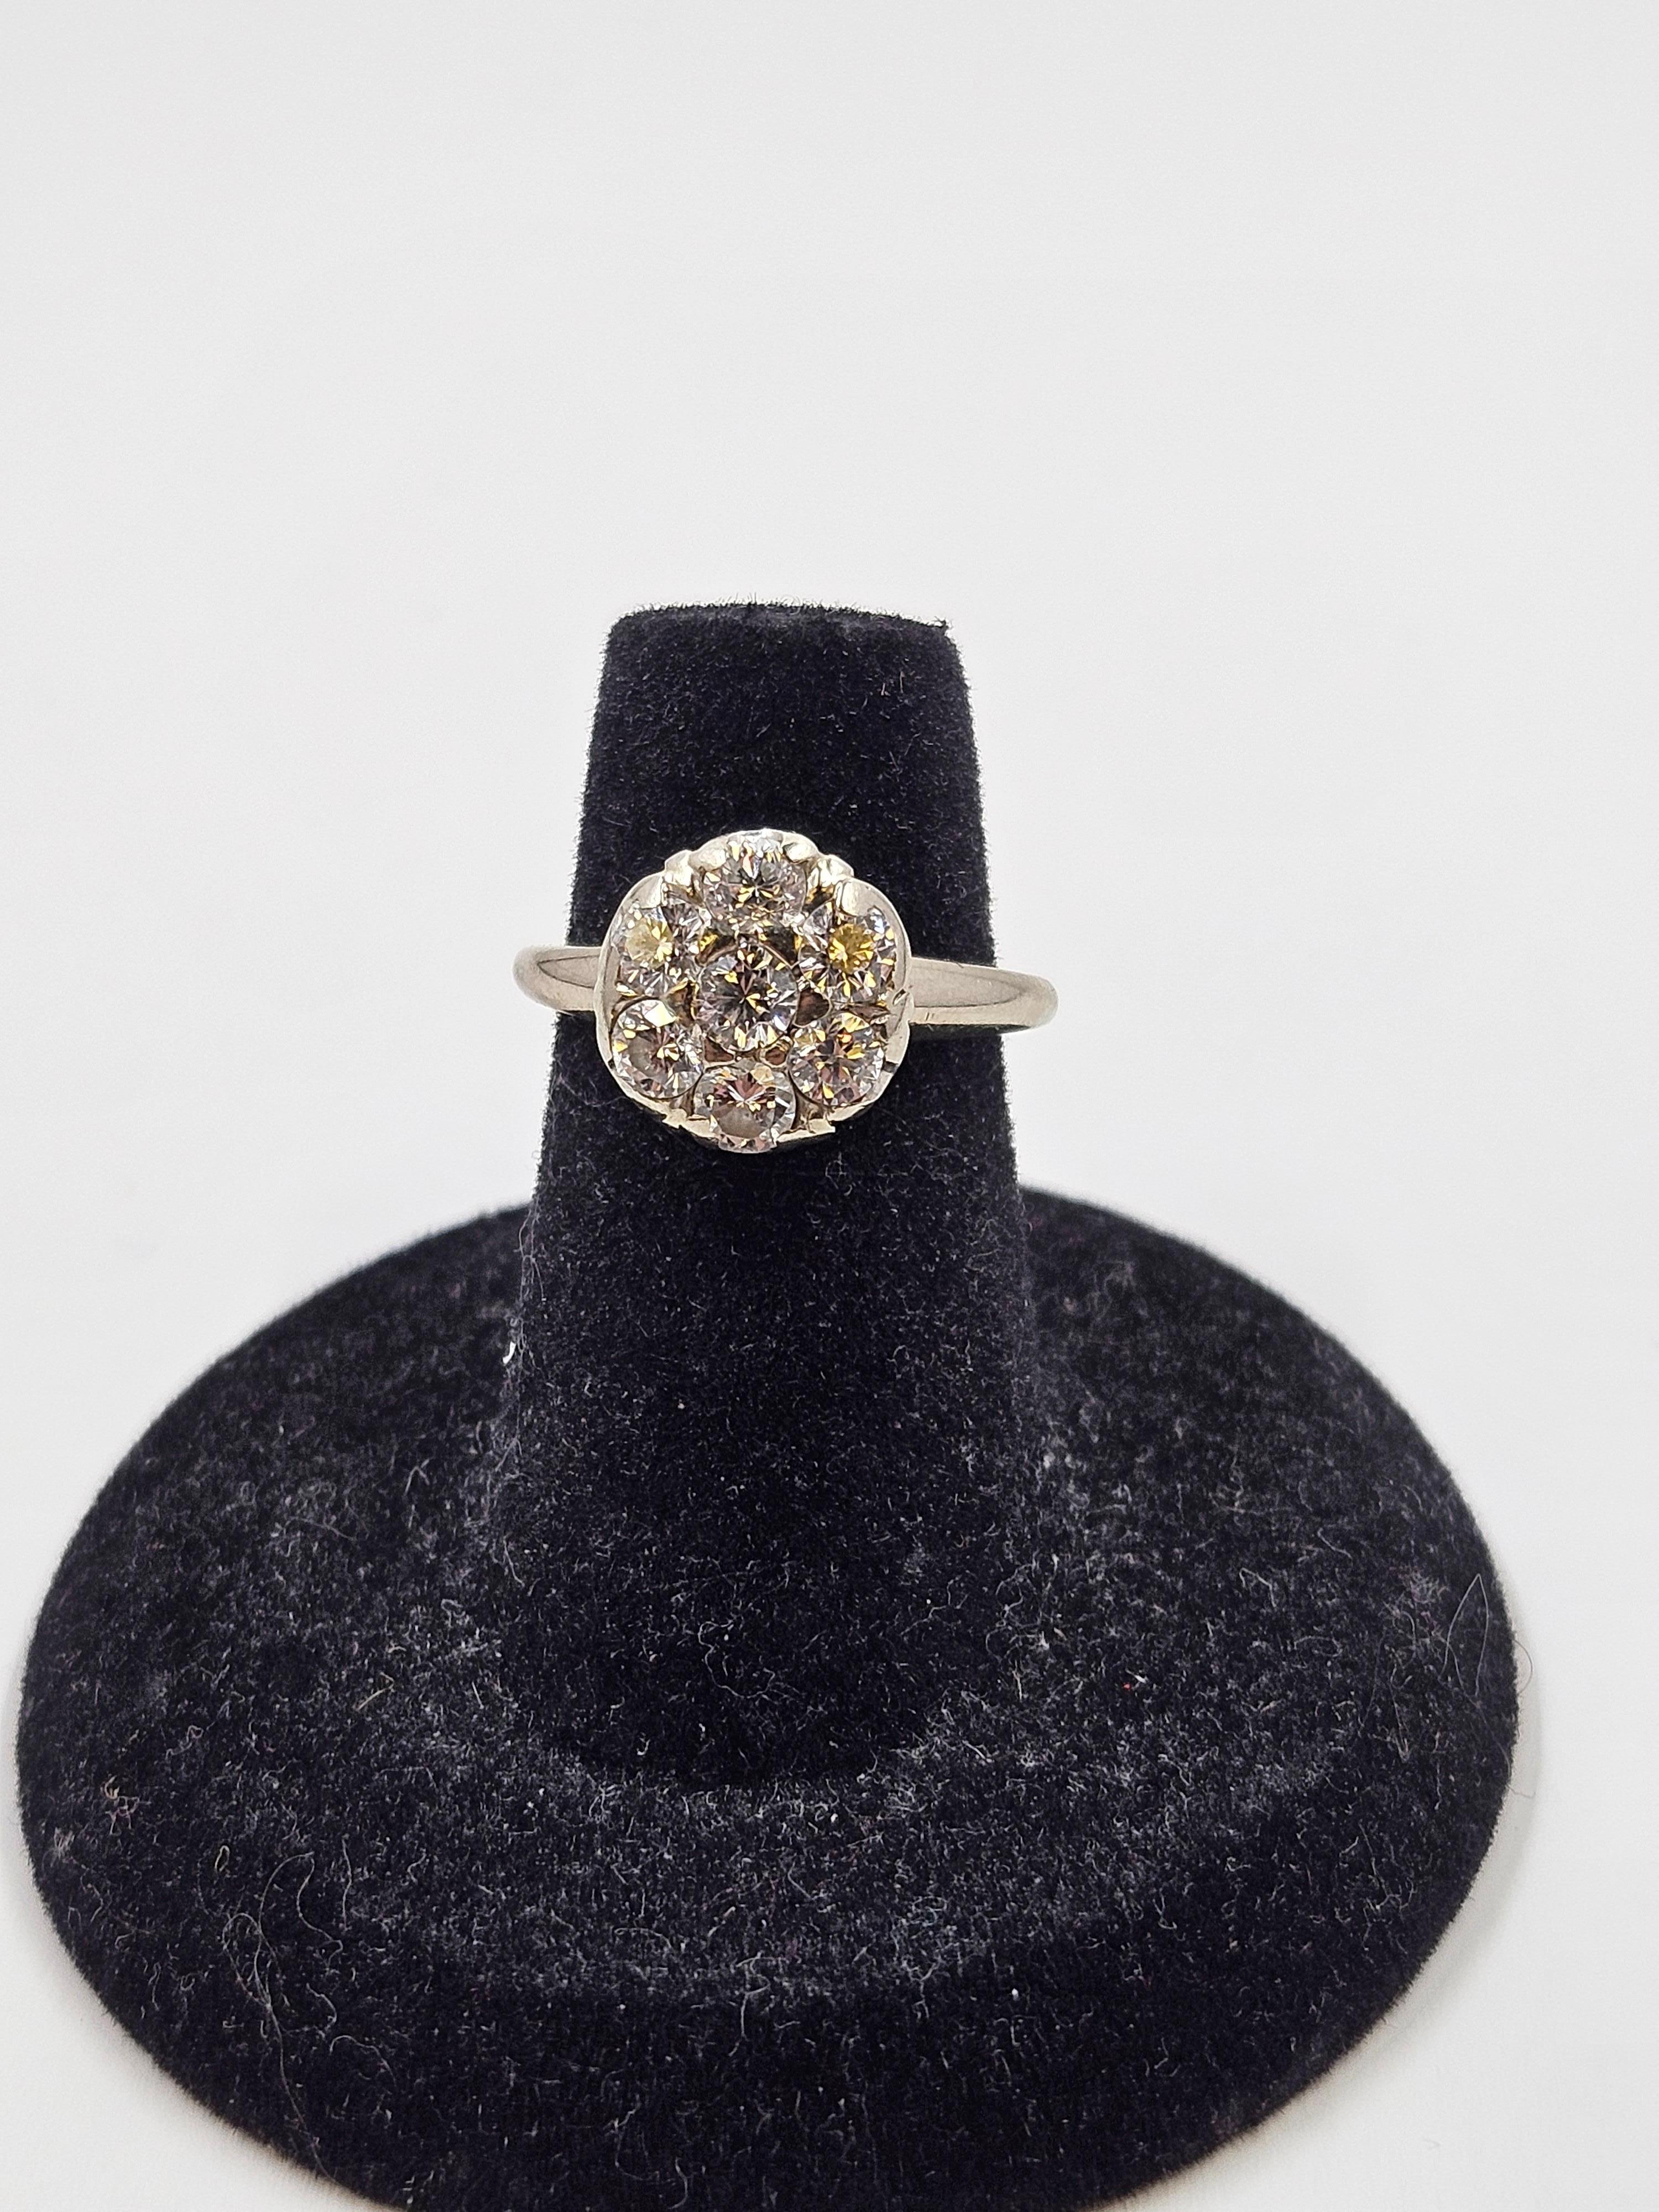 Antique art deco 18K white gold diamond cluster ring. Size 4.75. The cluster consists of 7 3.5mm diamonds with a total head size of 11mm. The ring weighs 3.1 grams. There is minimal finish loss. Wear is consistent with age and use. The diamonds